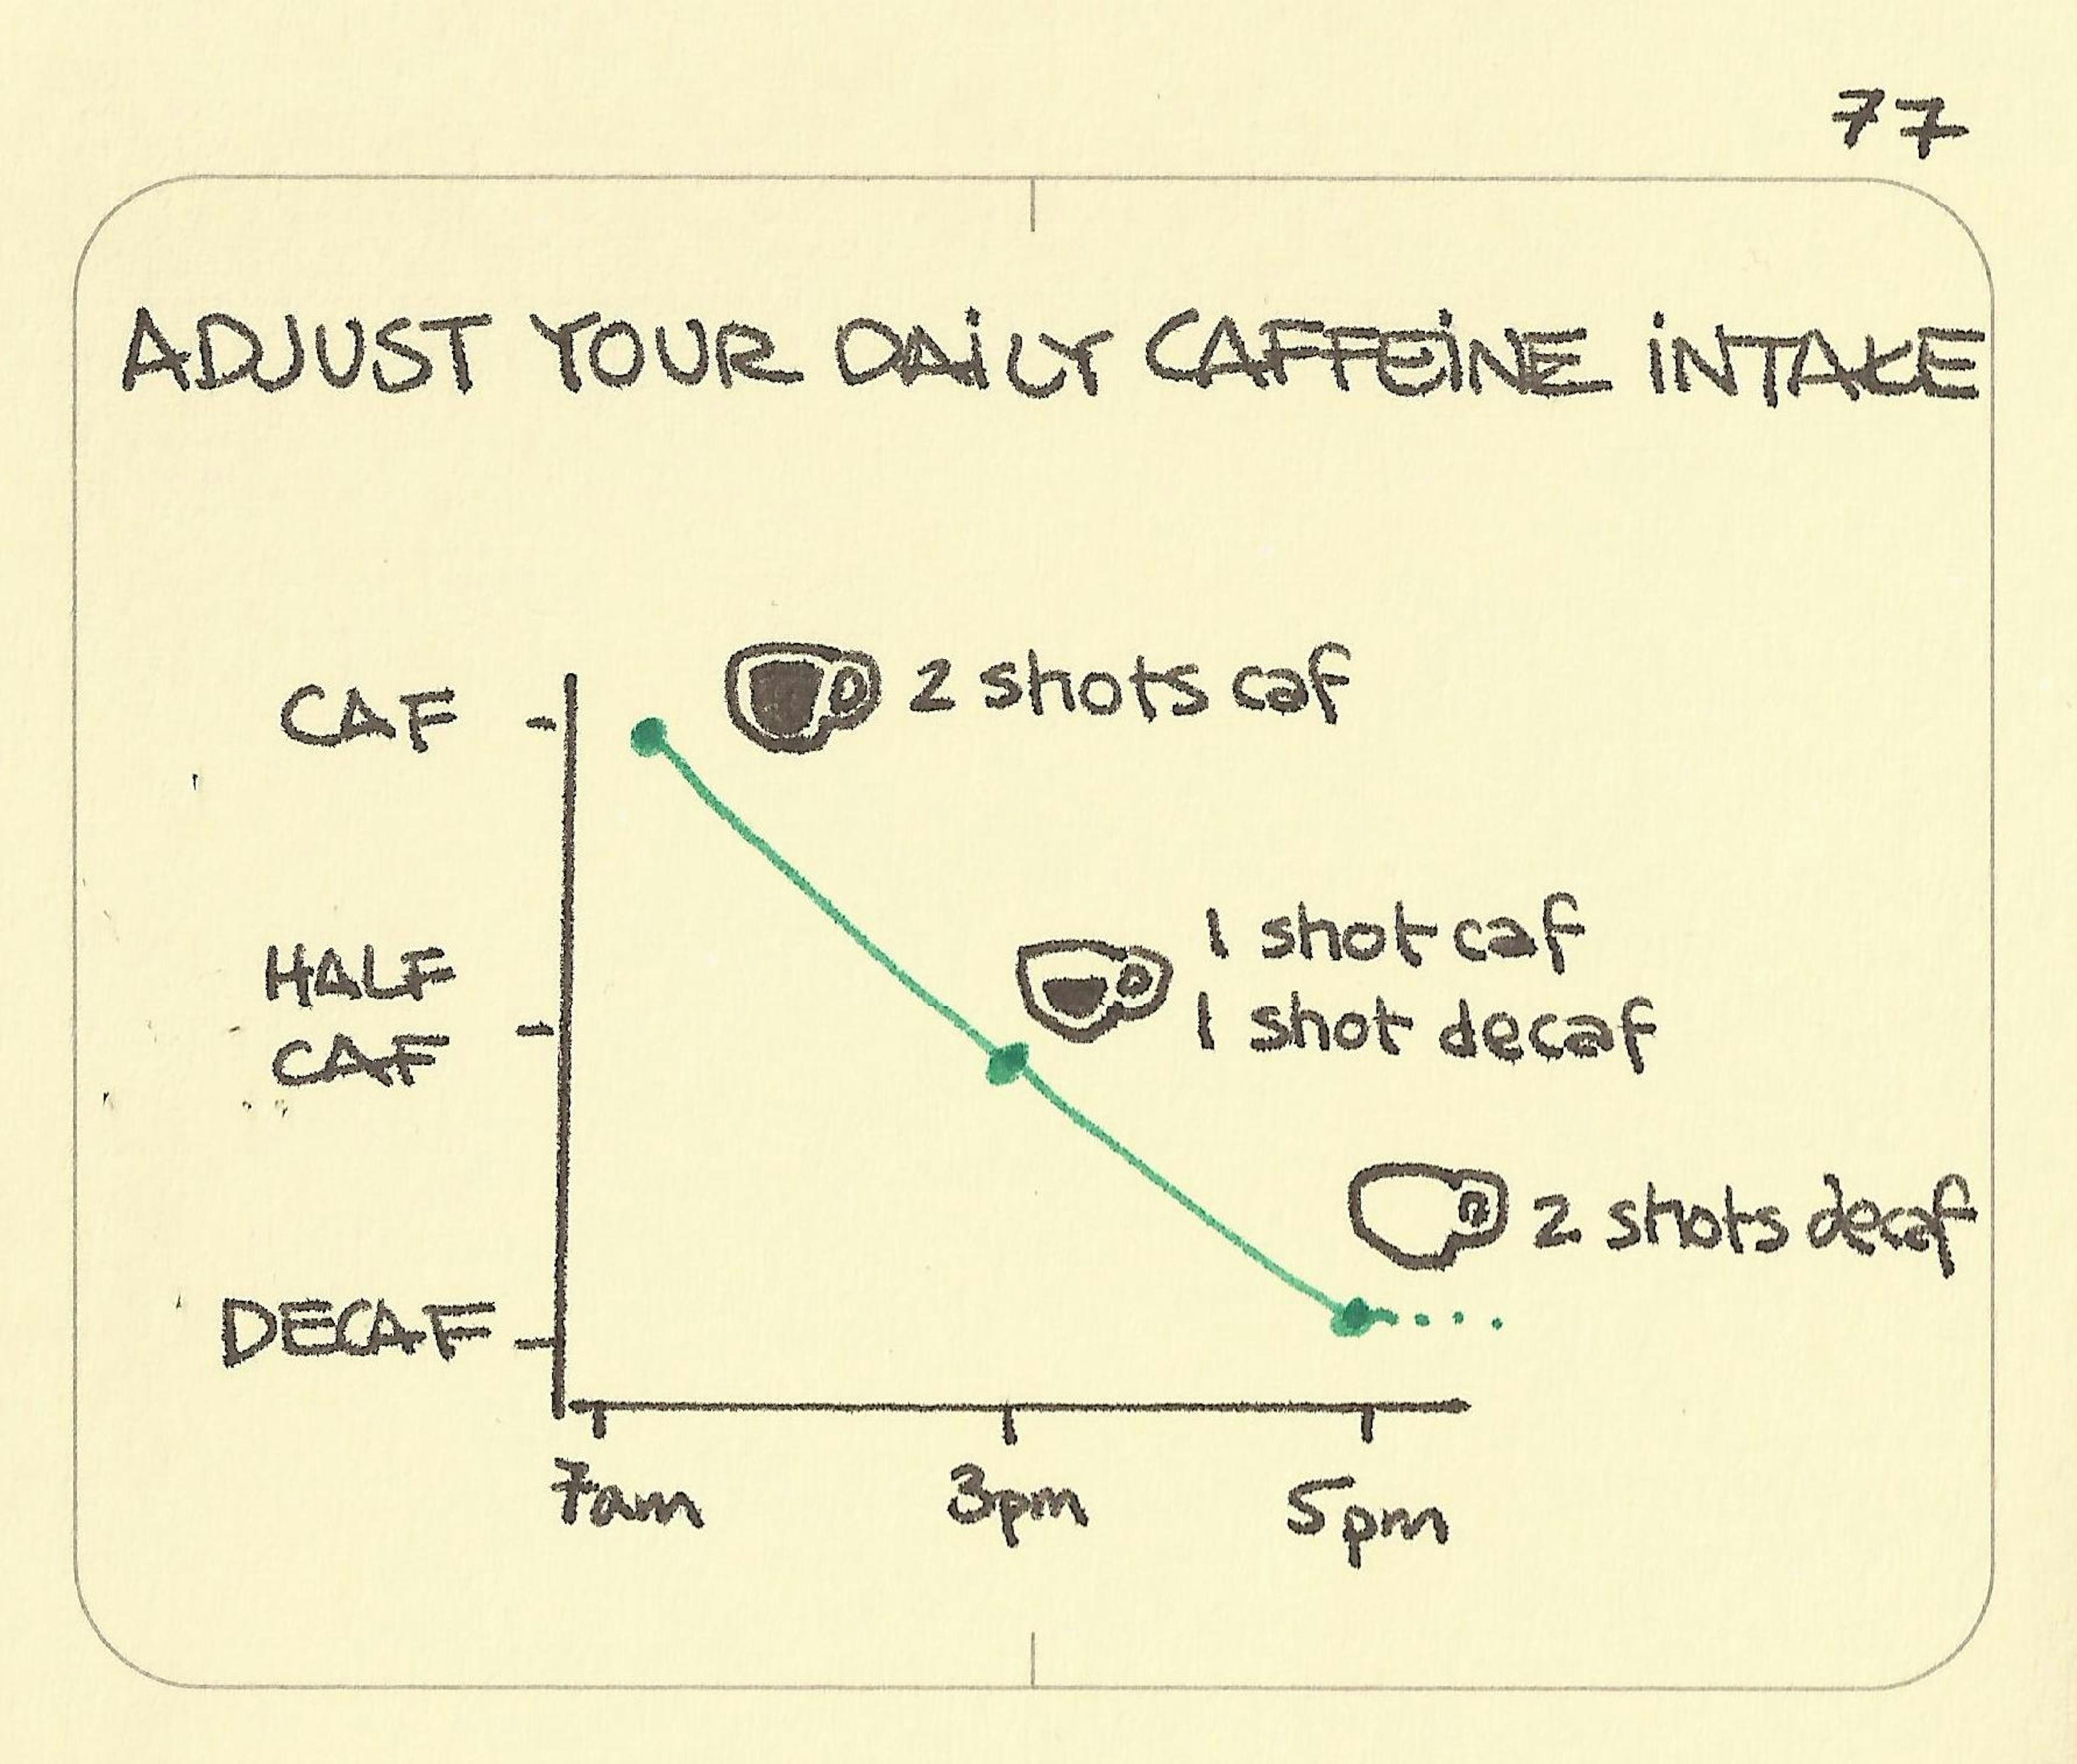 Adjust your daily caffeine intake - Sketchplanations